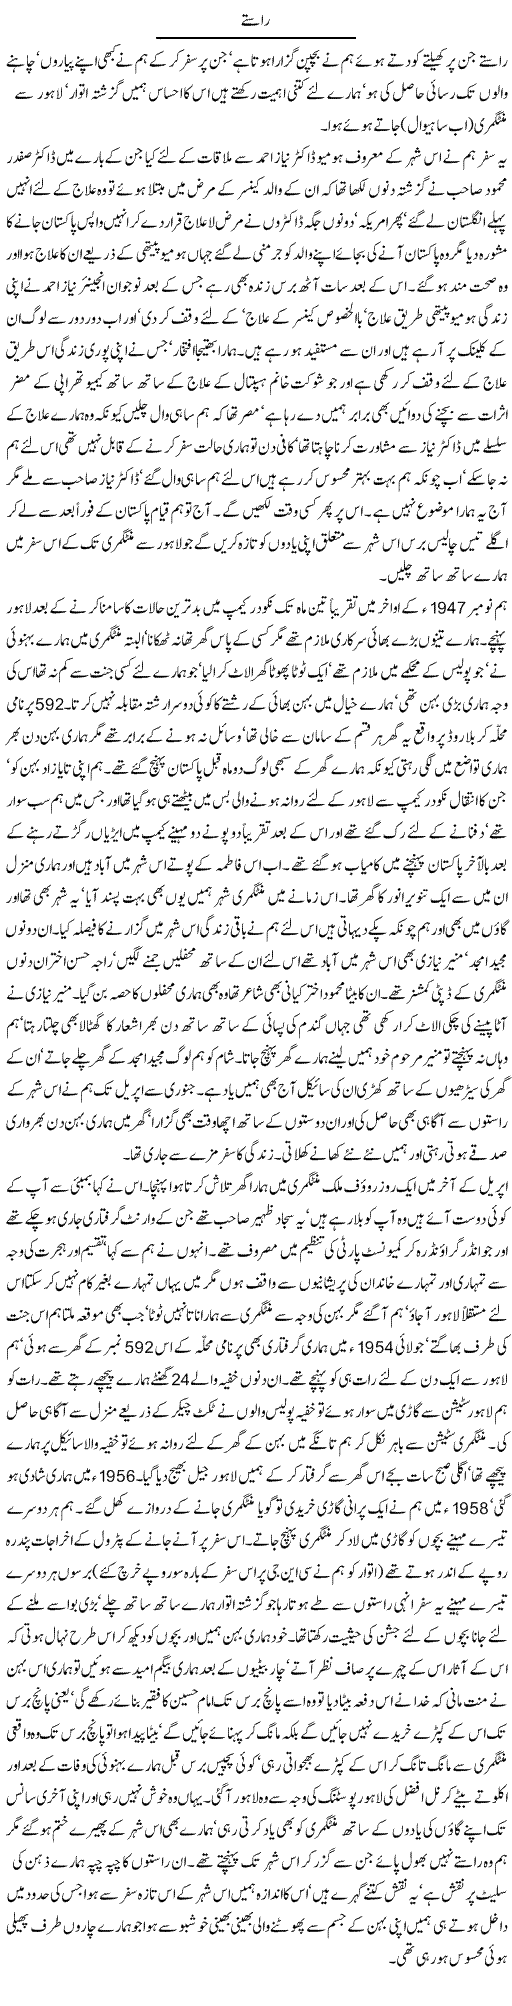 Paths of life Express Column Hameed Akhtar 17 March 2011